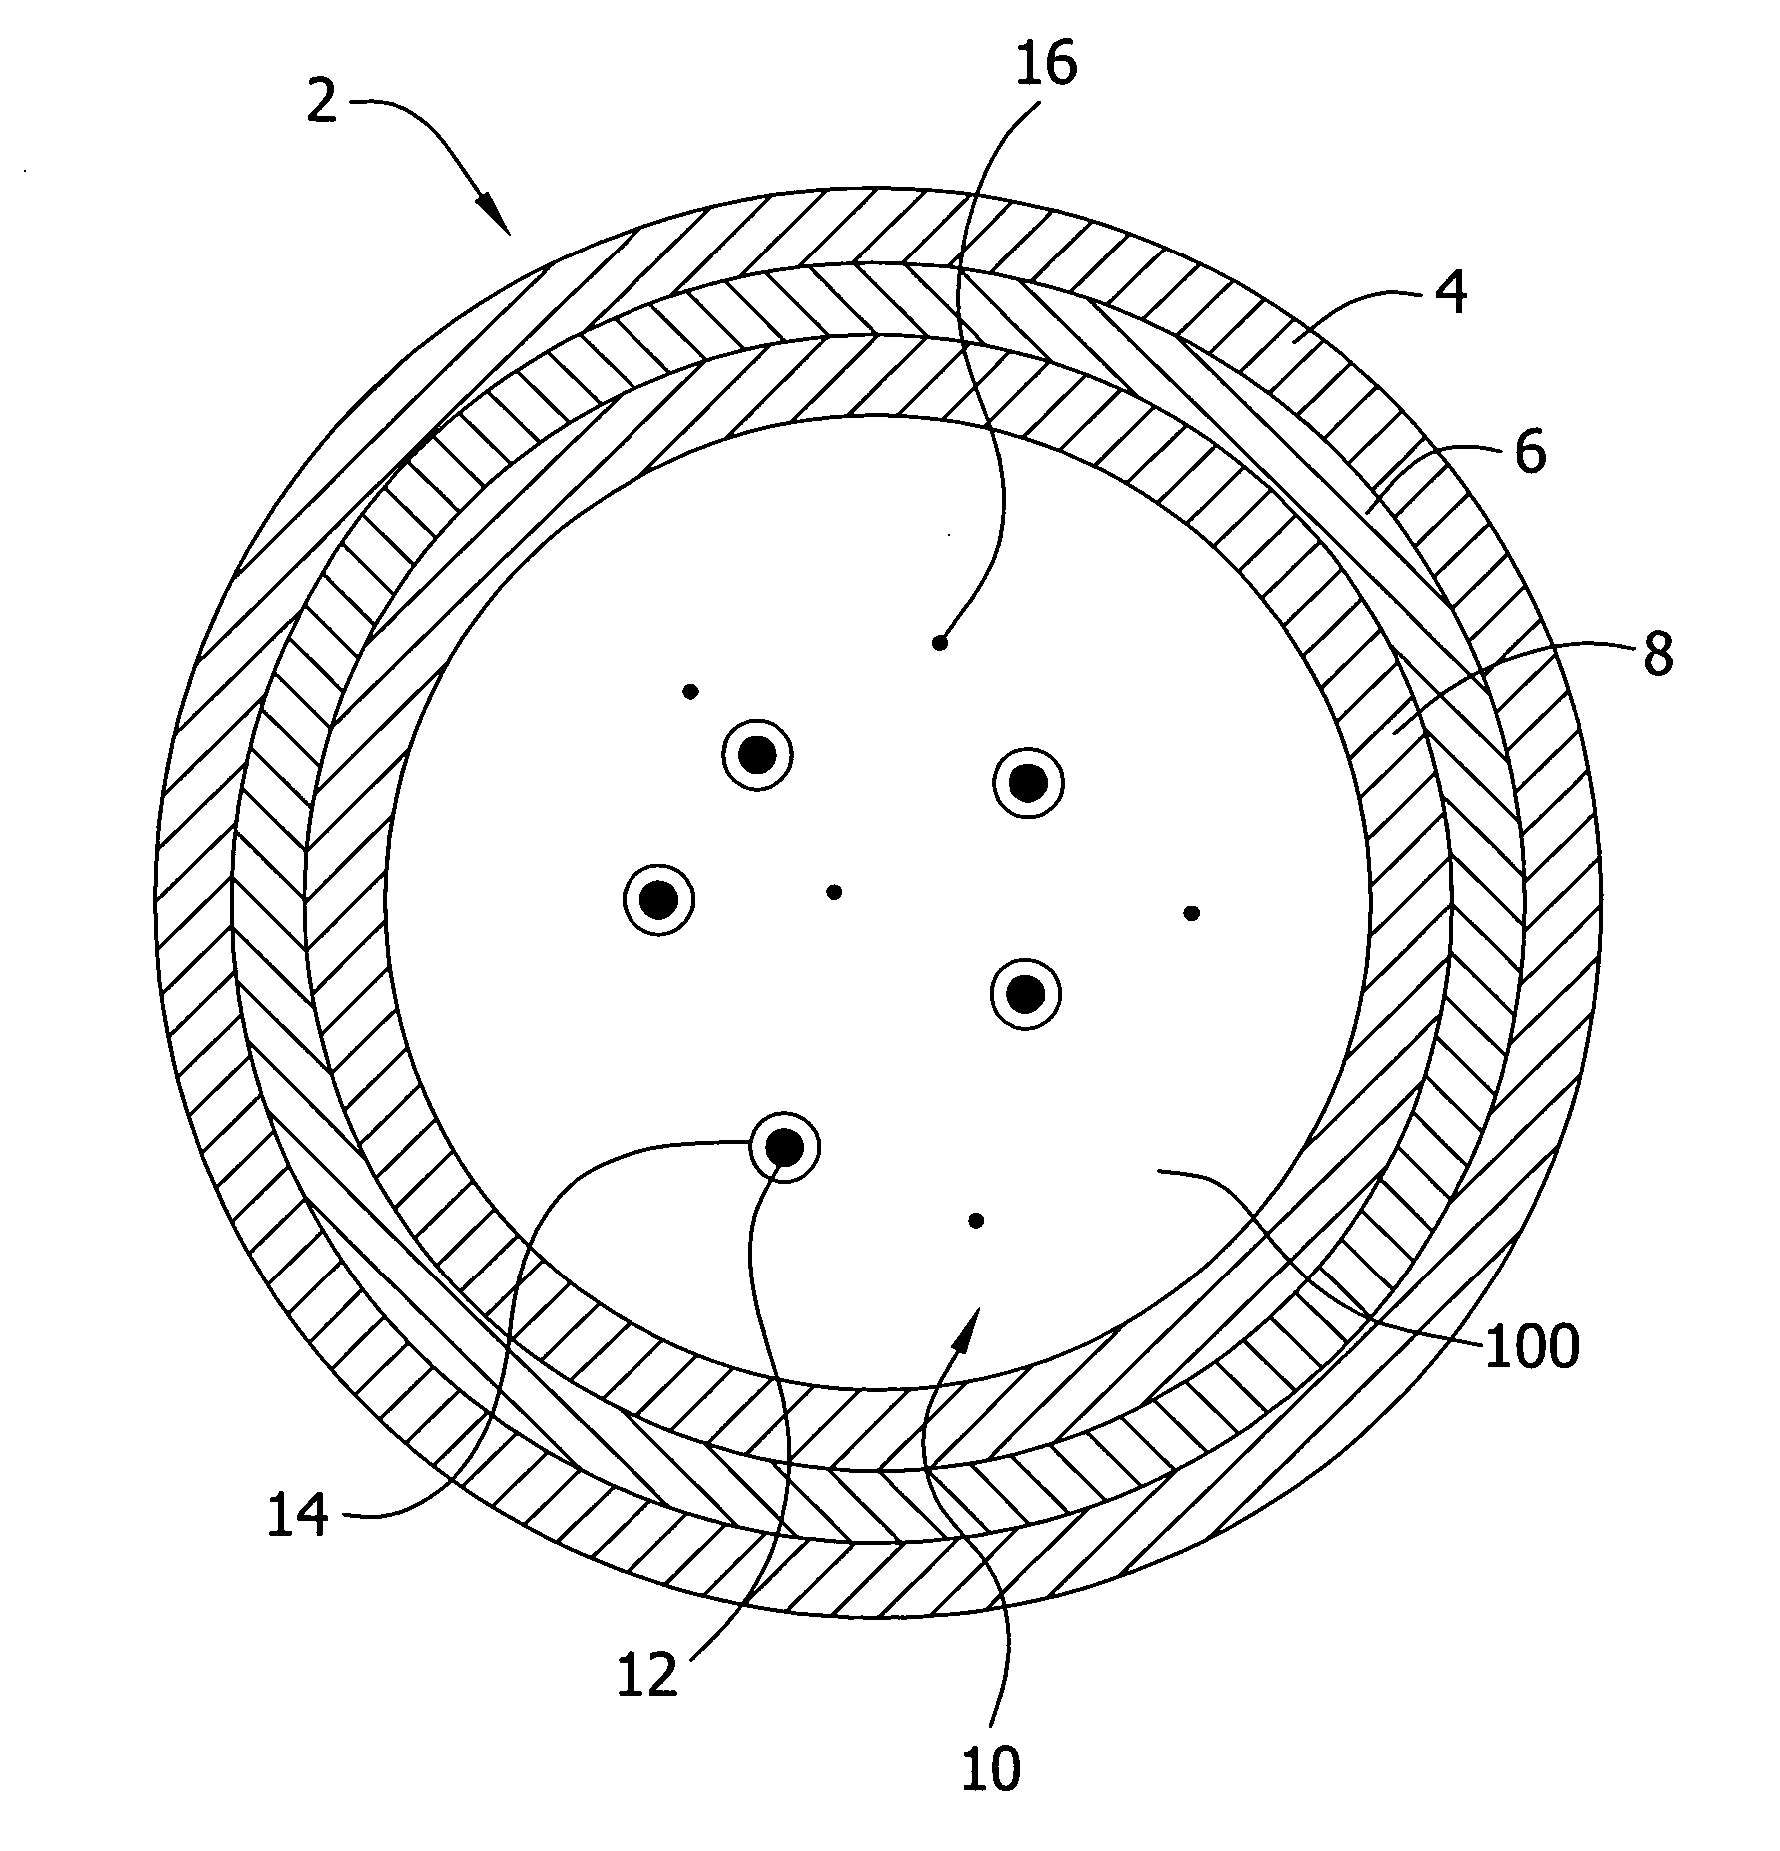 Processes for producing microencapsulated delivery vehicles